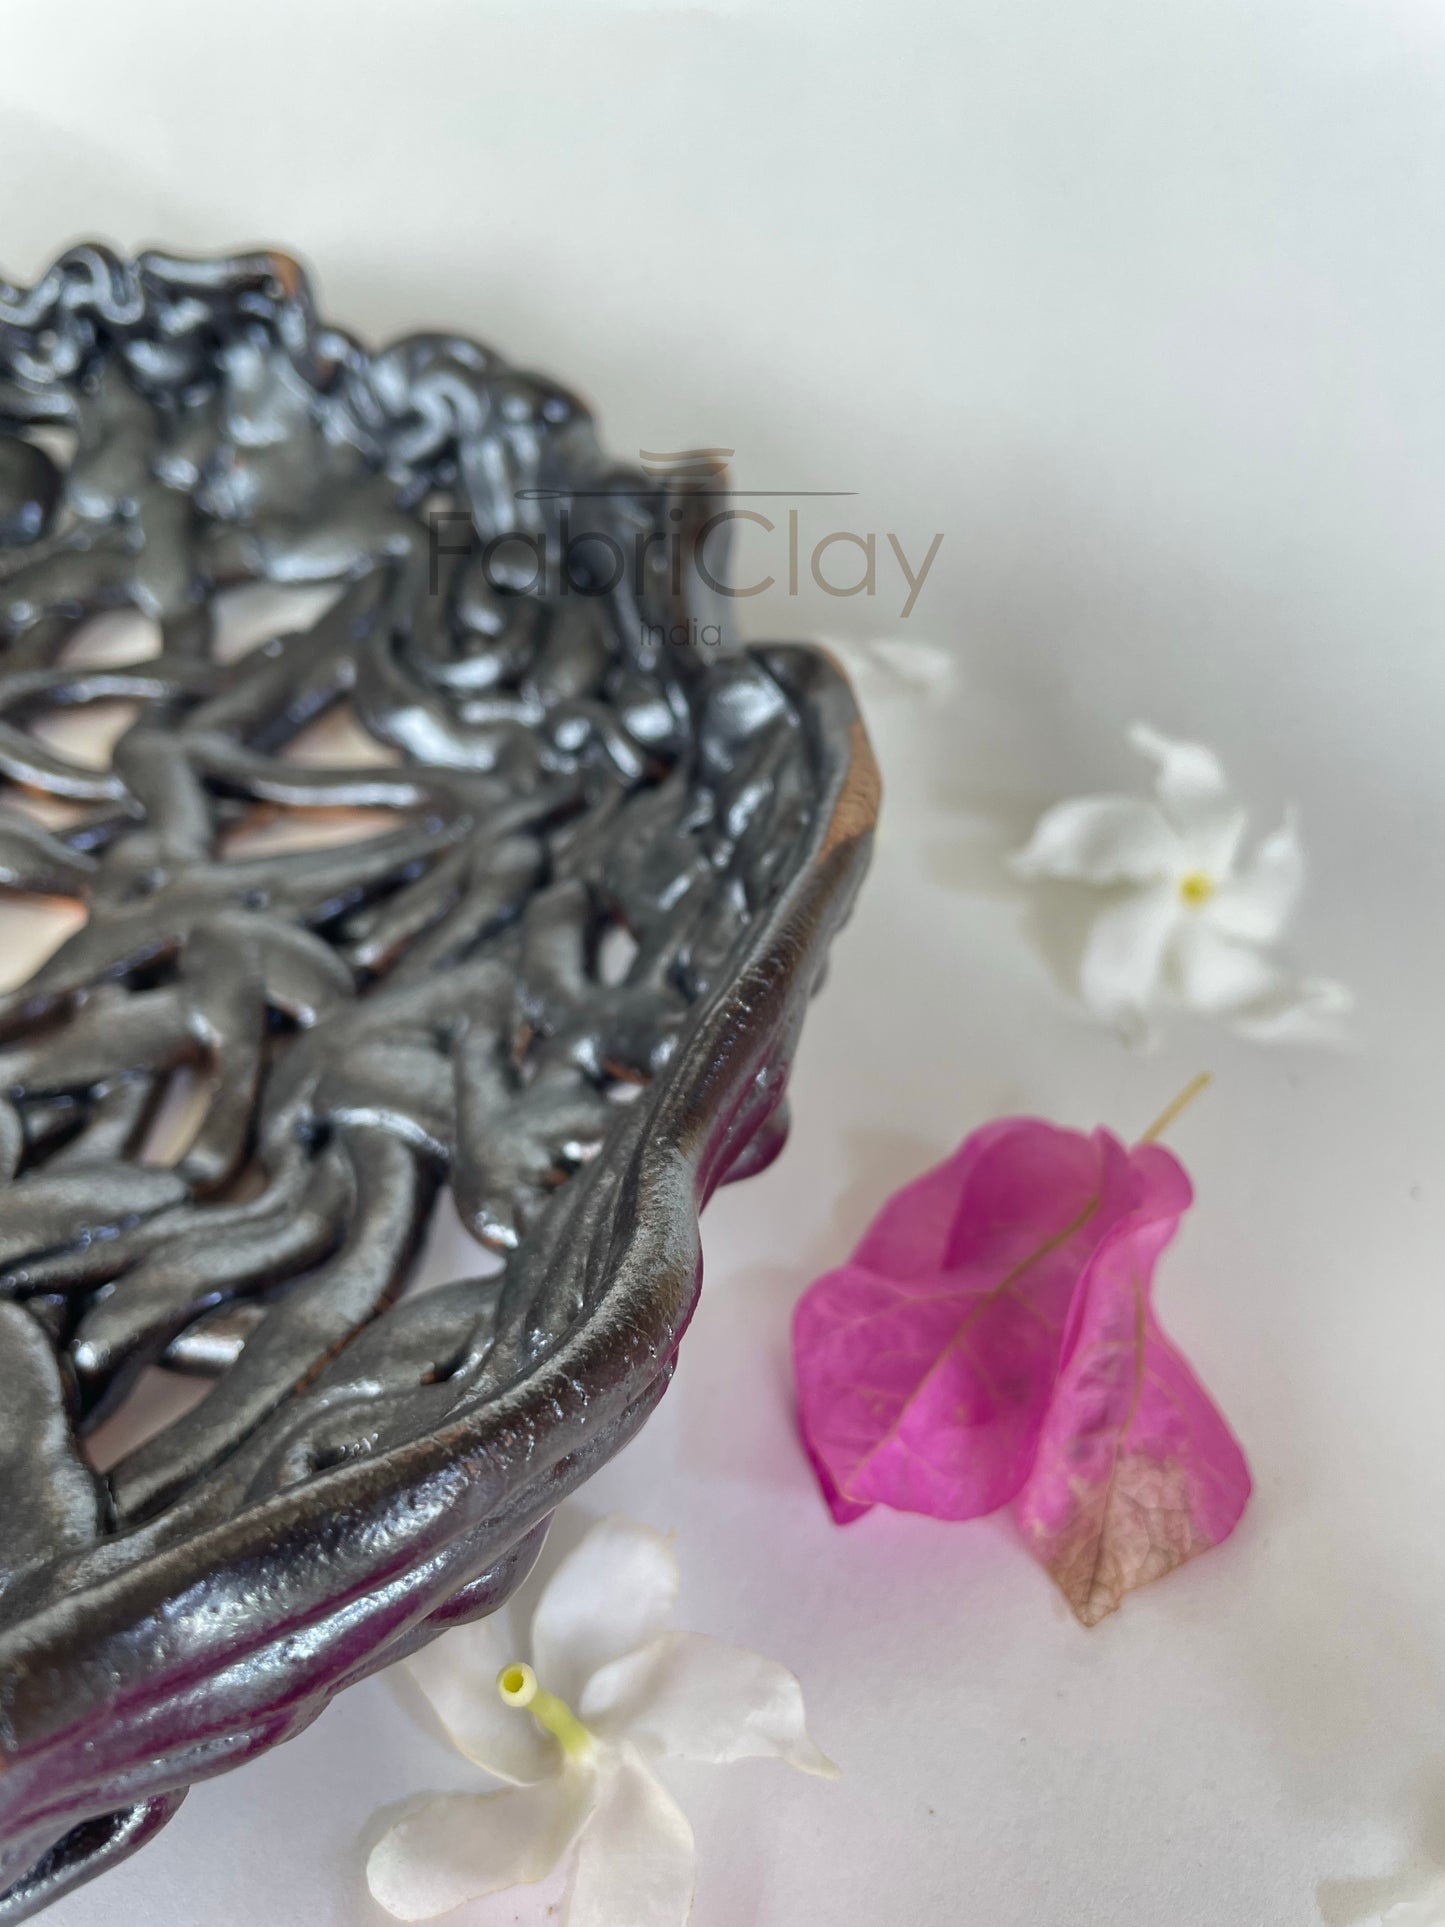 Clay coil fruits basket